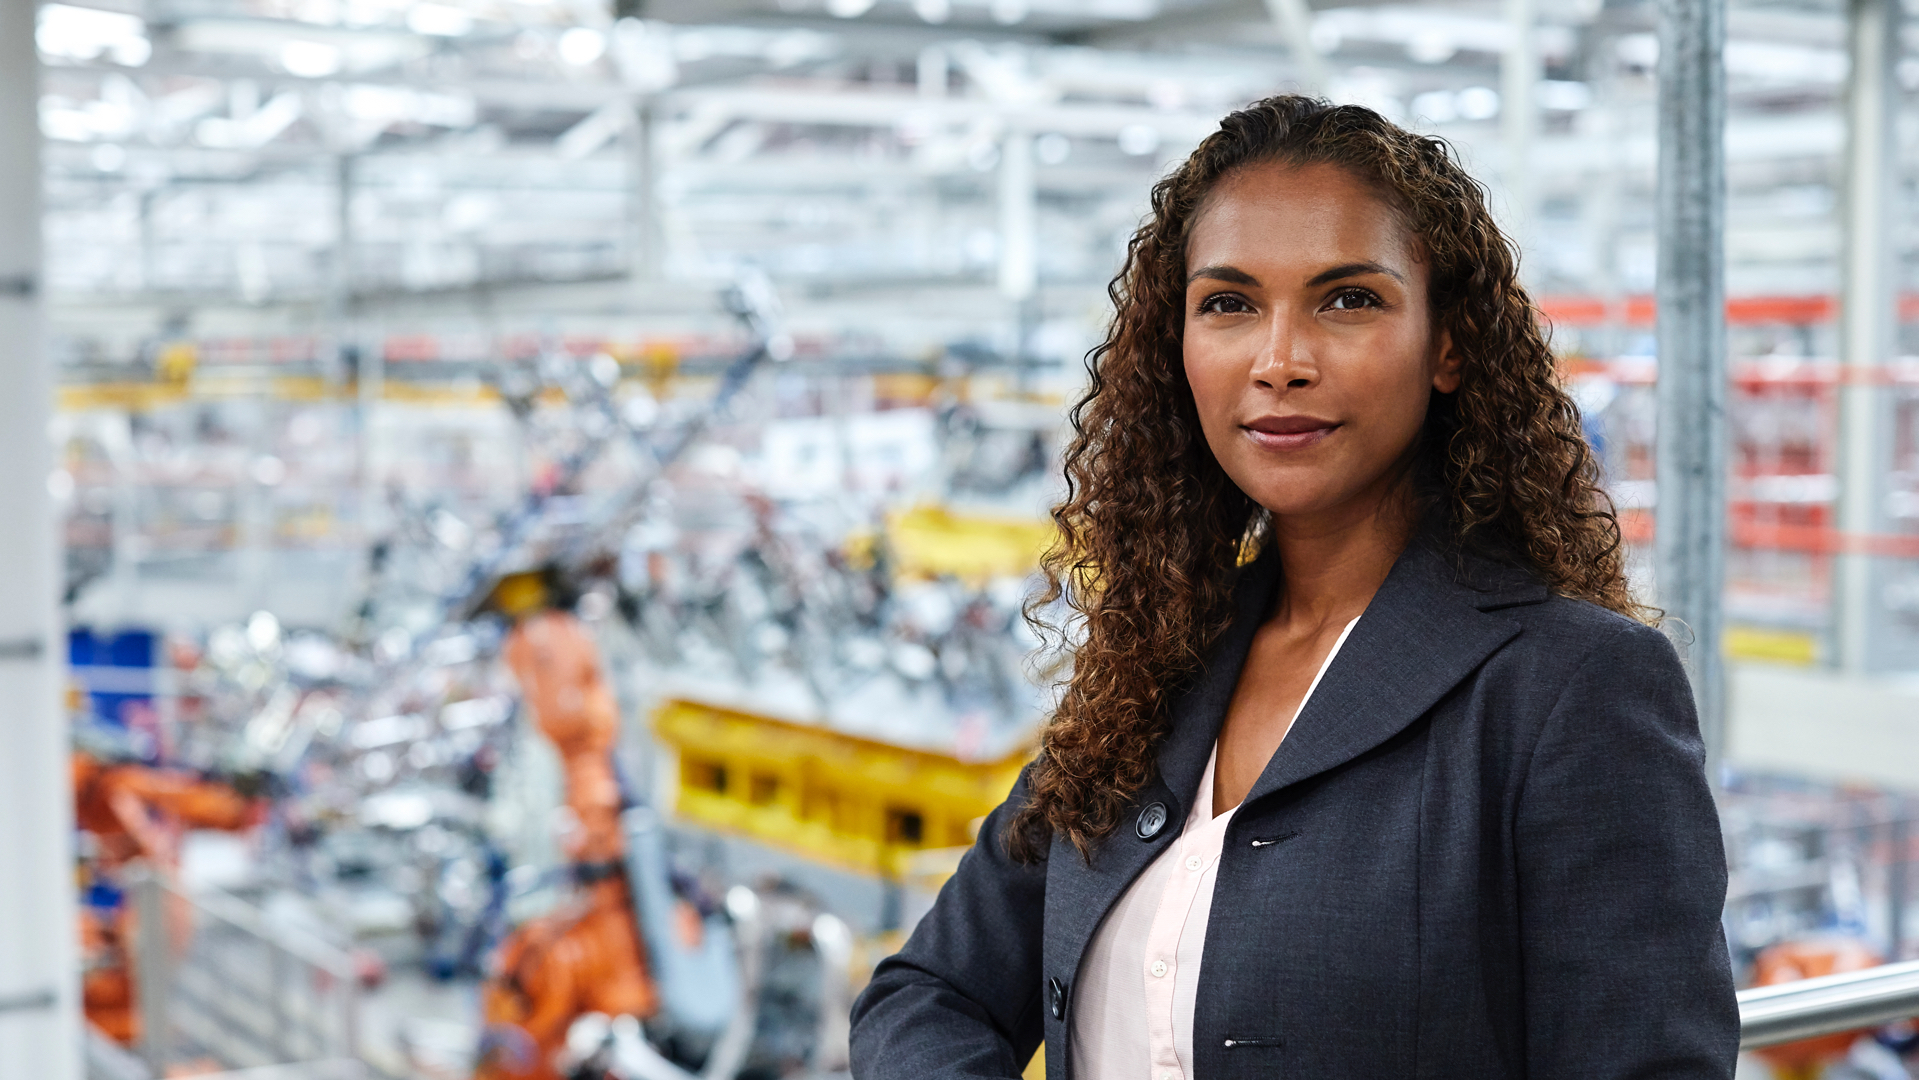 Woman in business clothes standing in a production facility, with heavy machinery out of focus in the background.